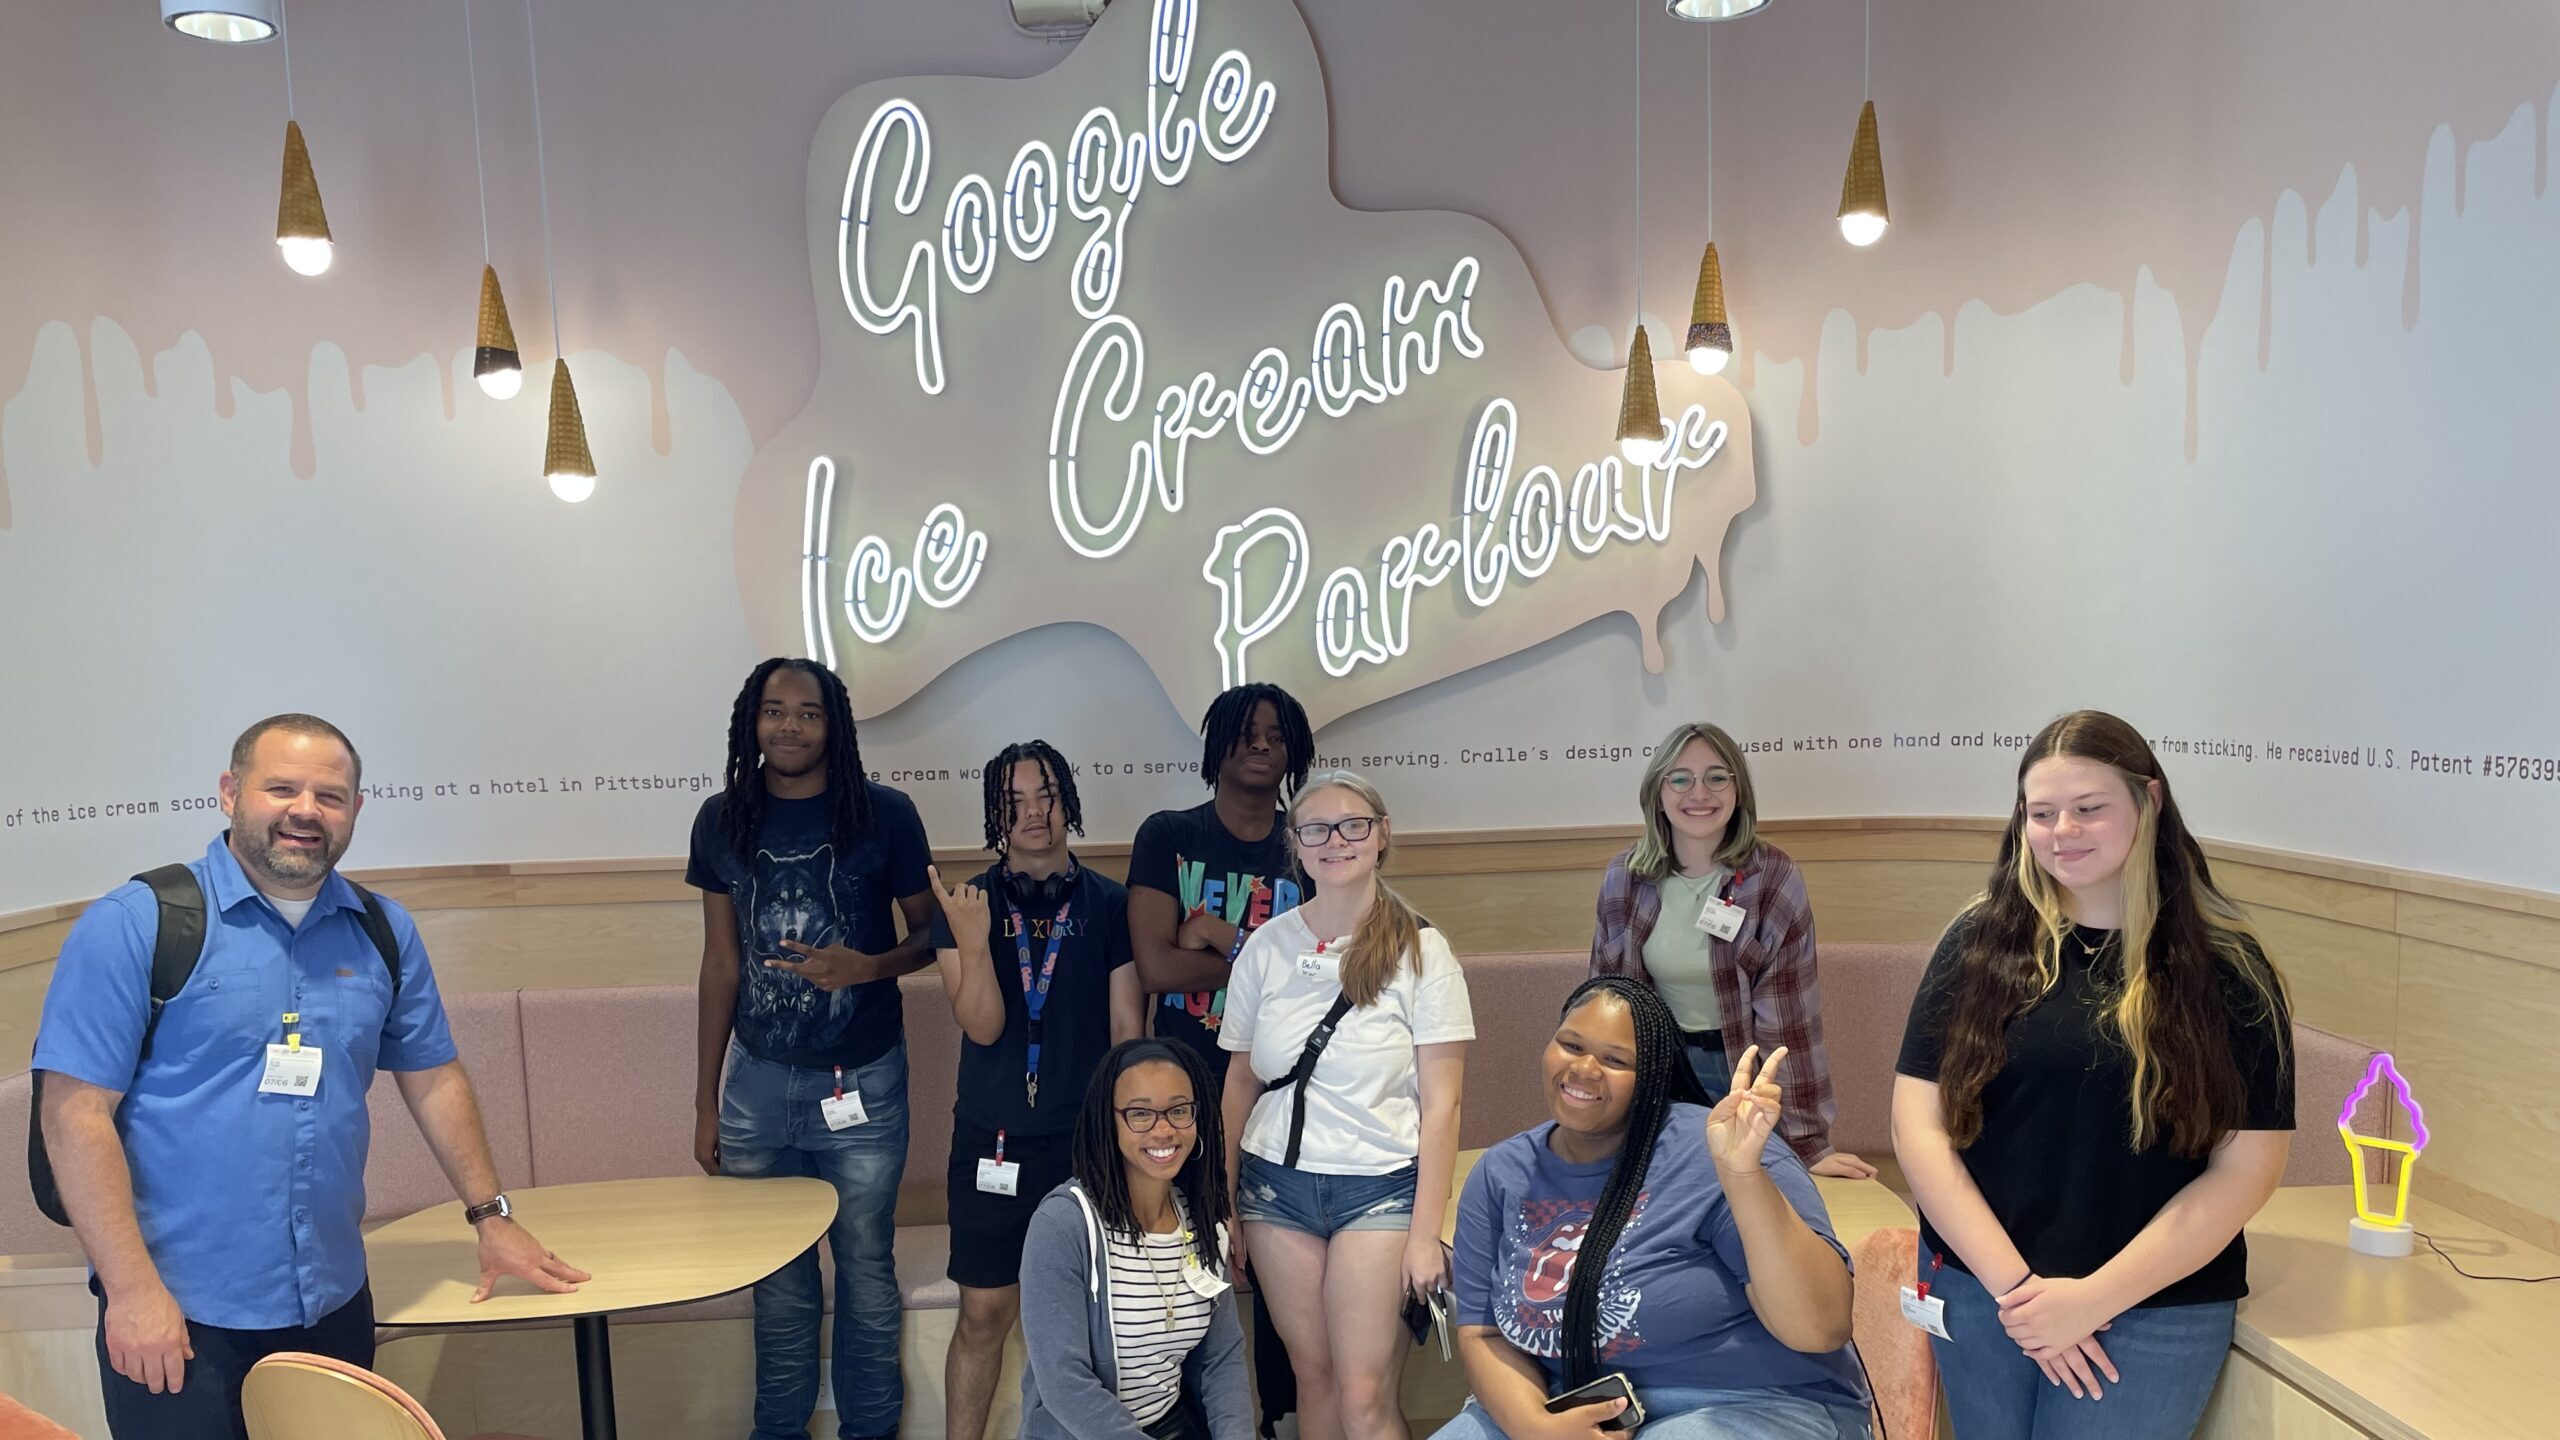 Students in the Summer Program visit Google and pose in front of a neon sign that reads, "Google Ice Cream Parlor"